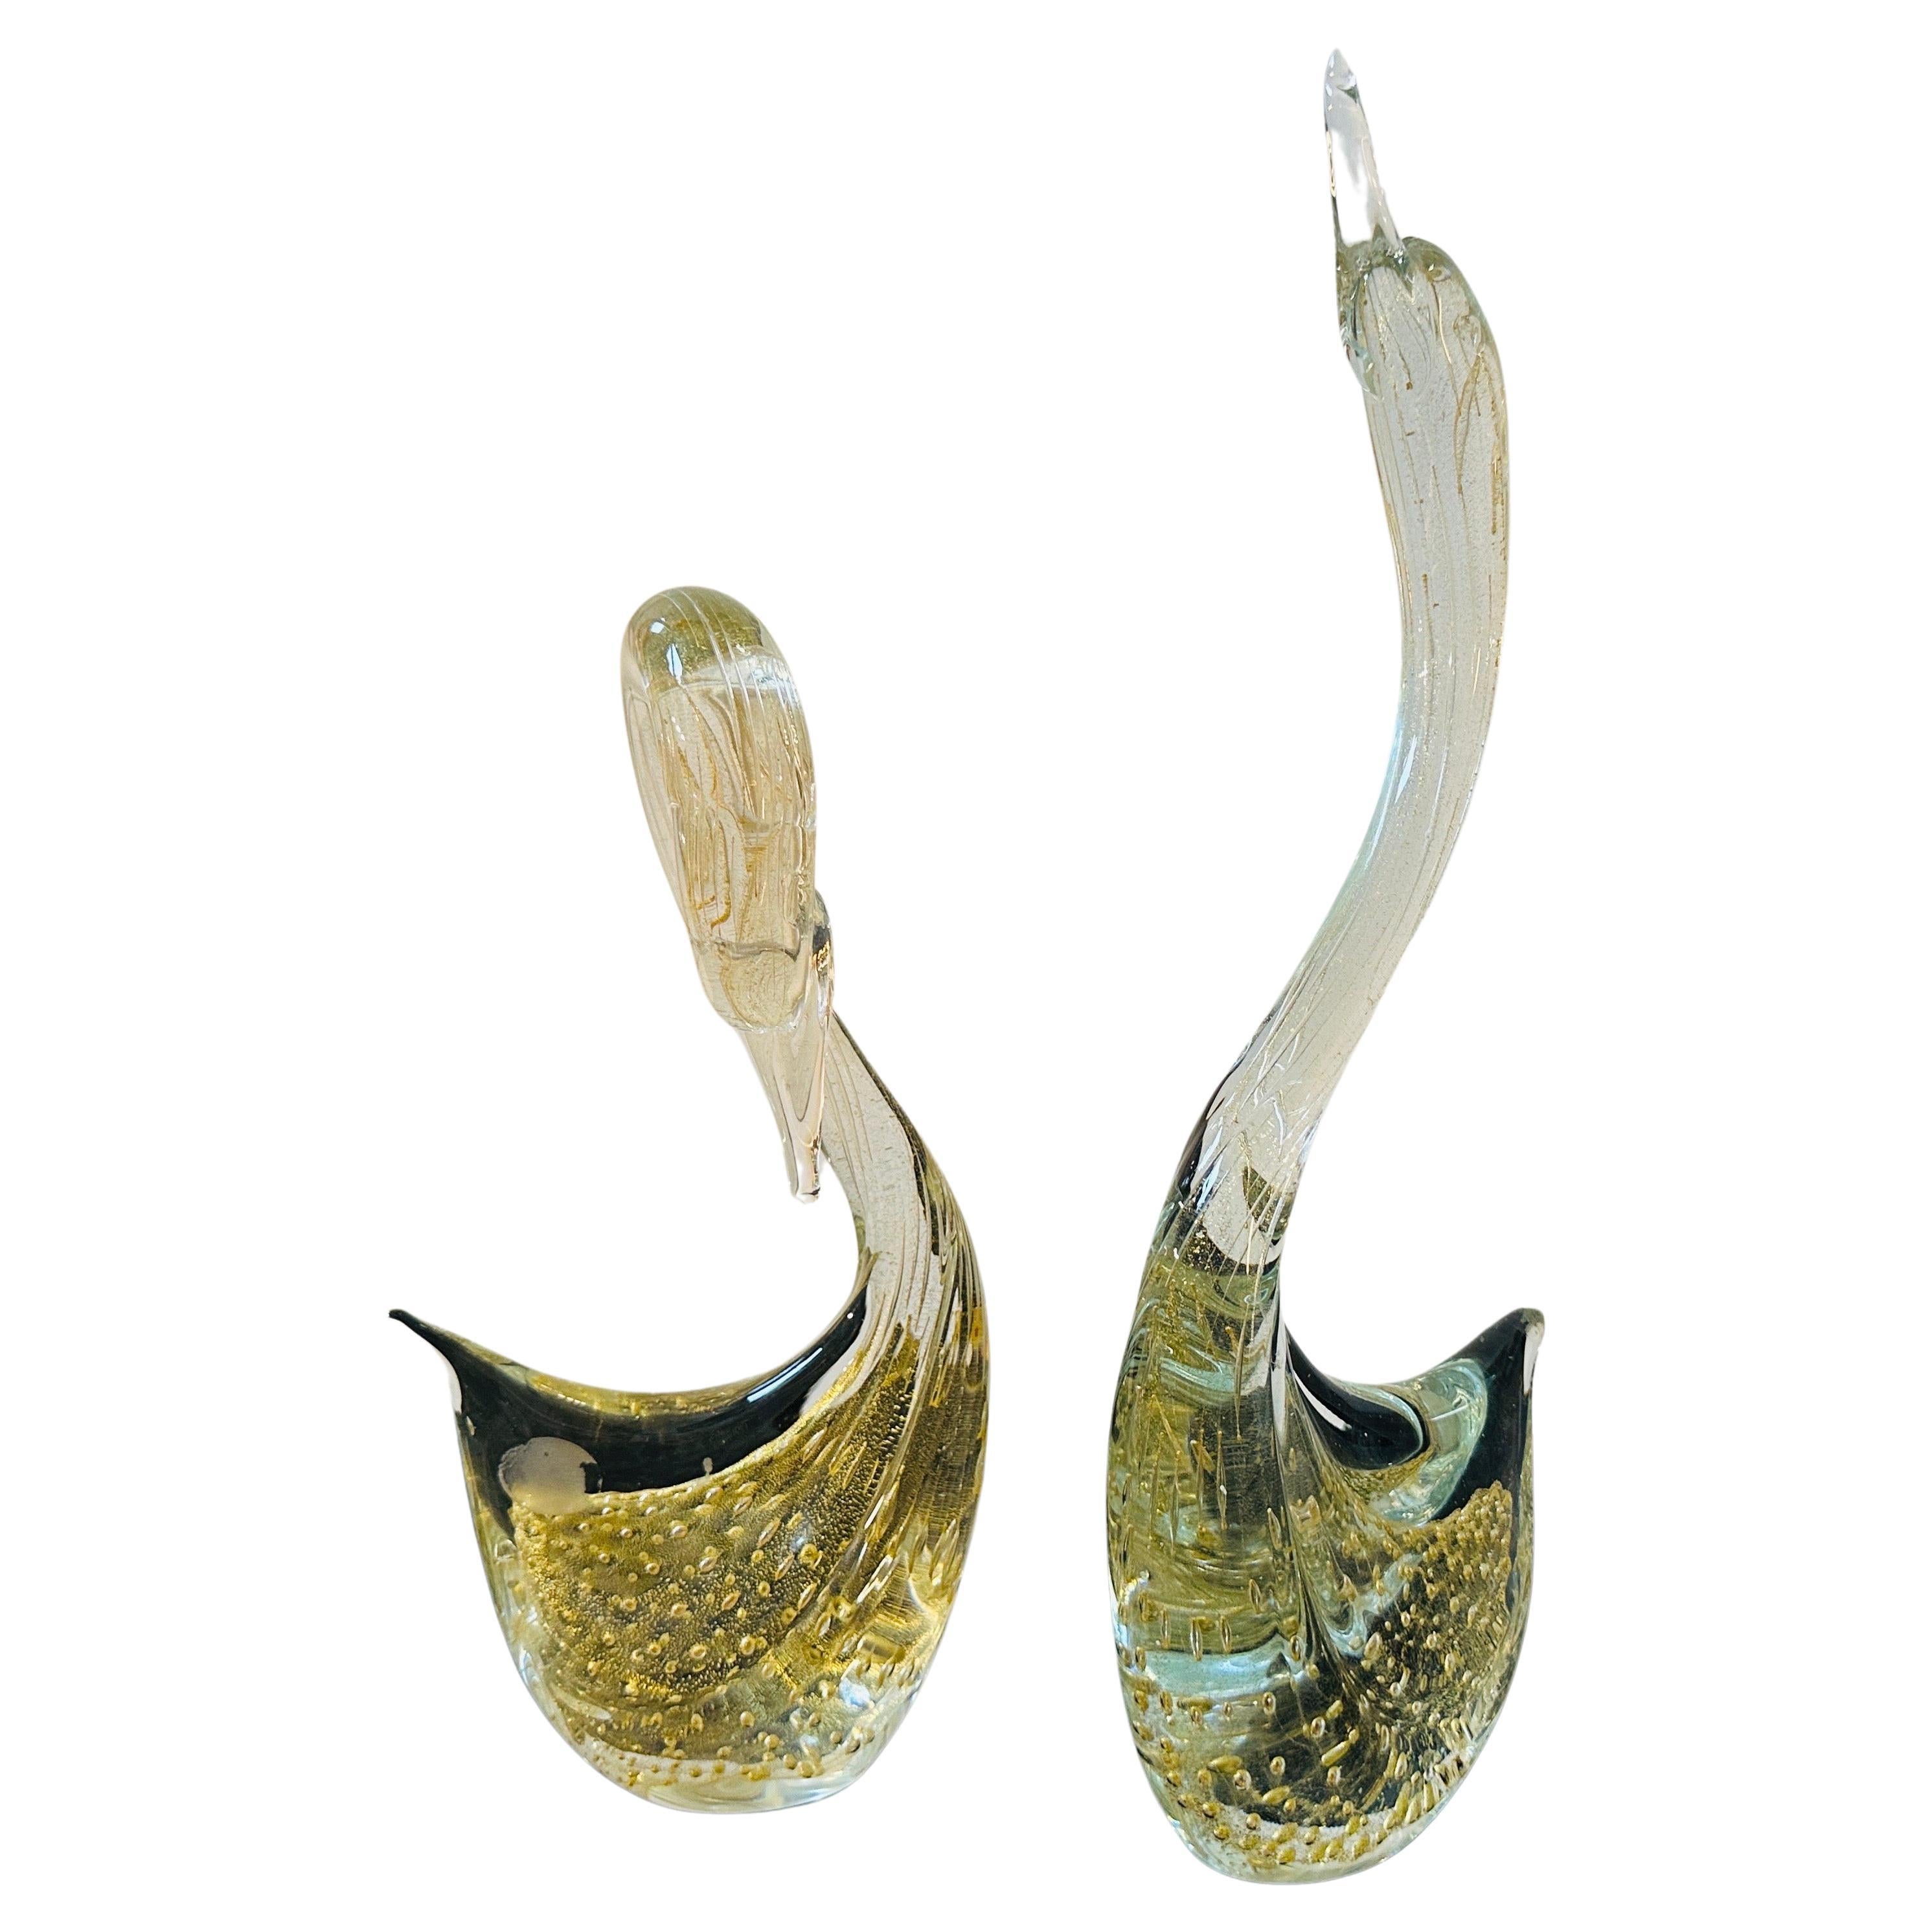 Two 1960s Modernist Clear and Gold Murano Glass Sculptures of Swans are a delightful representation of the artistry and craftsmanship associated with Murano glass. The swan sculptures embody the elegance and grace of these majestic birds through the